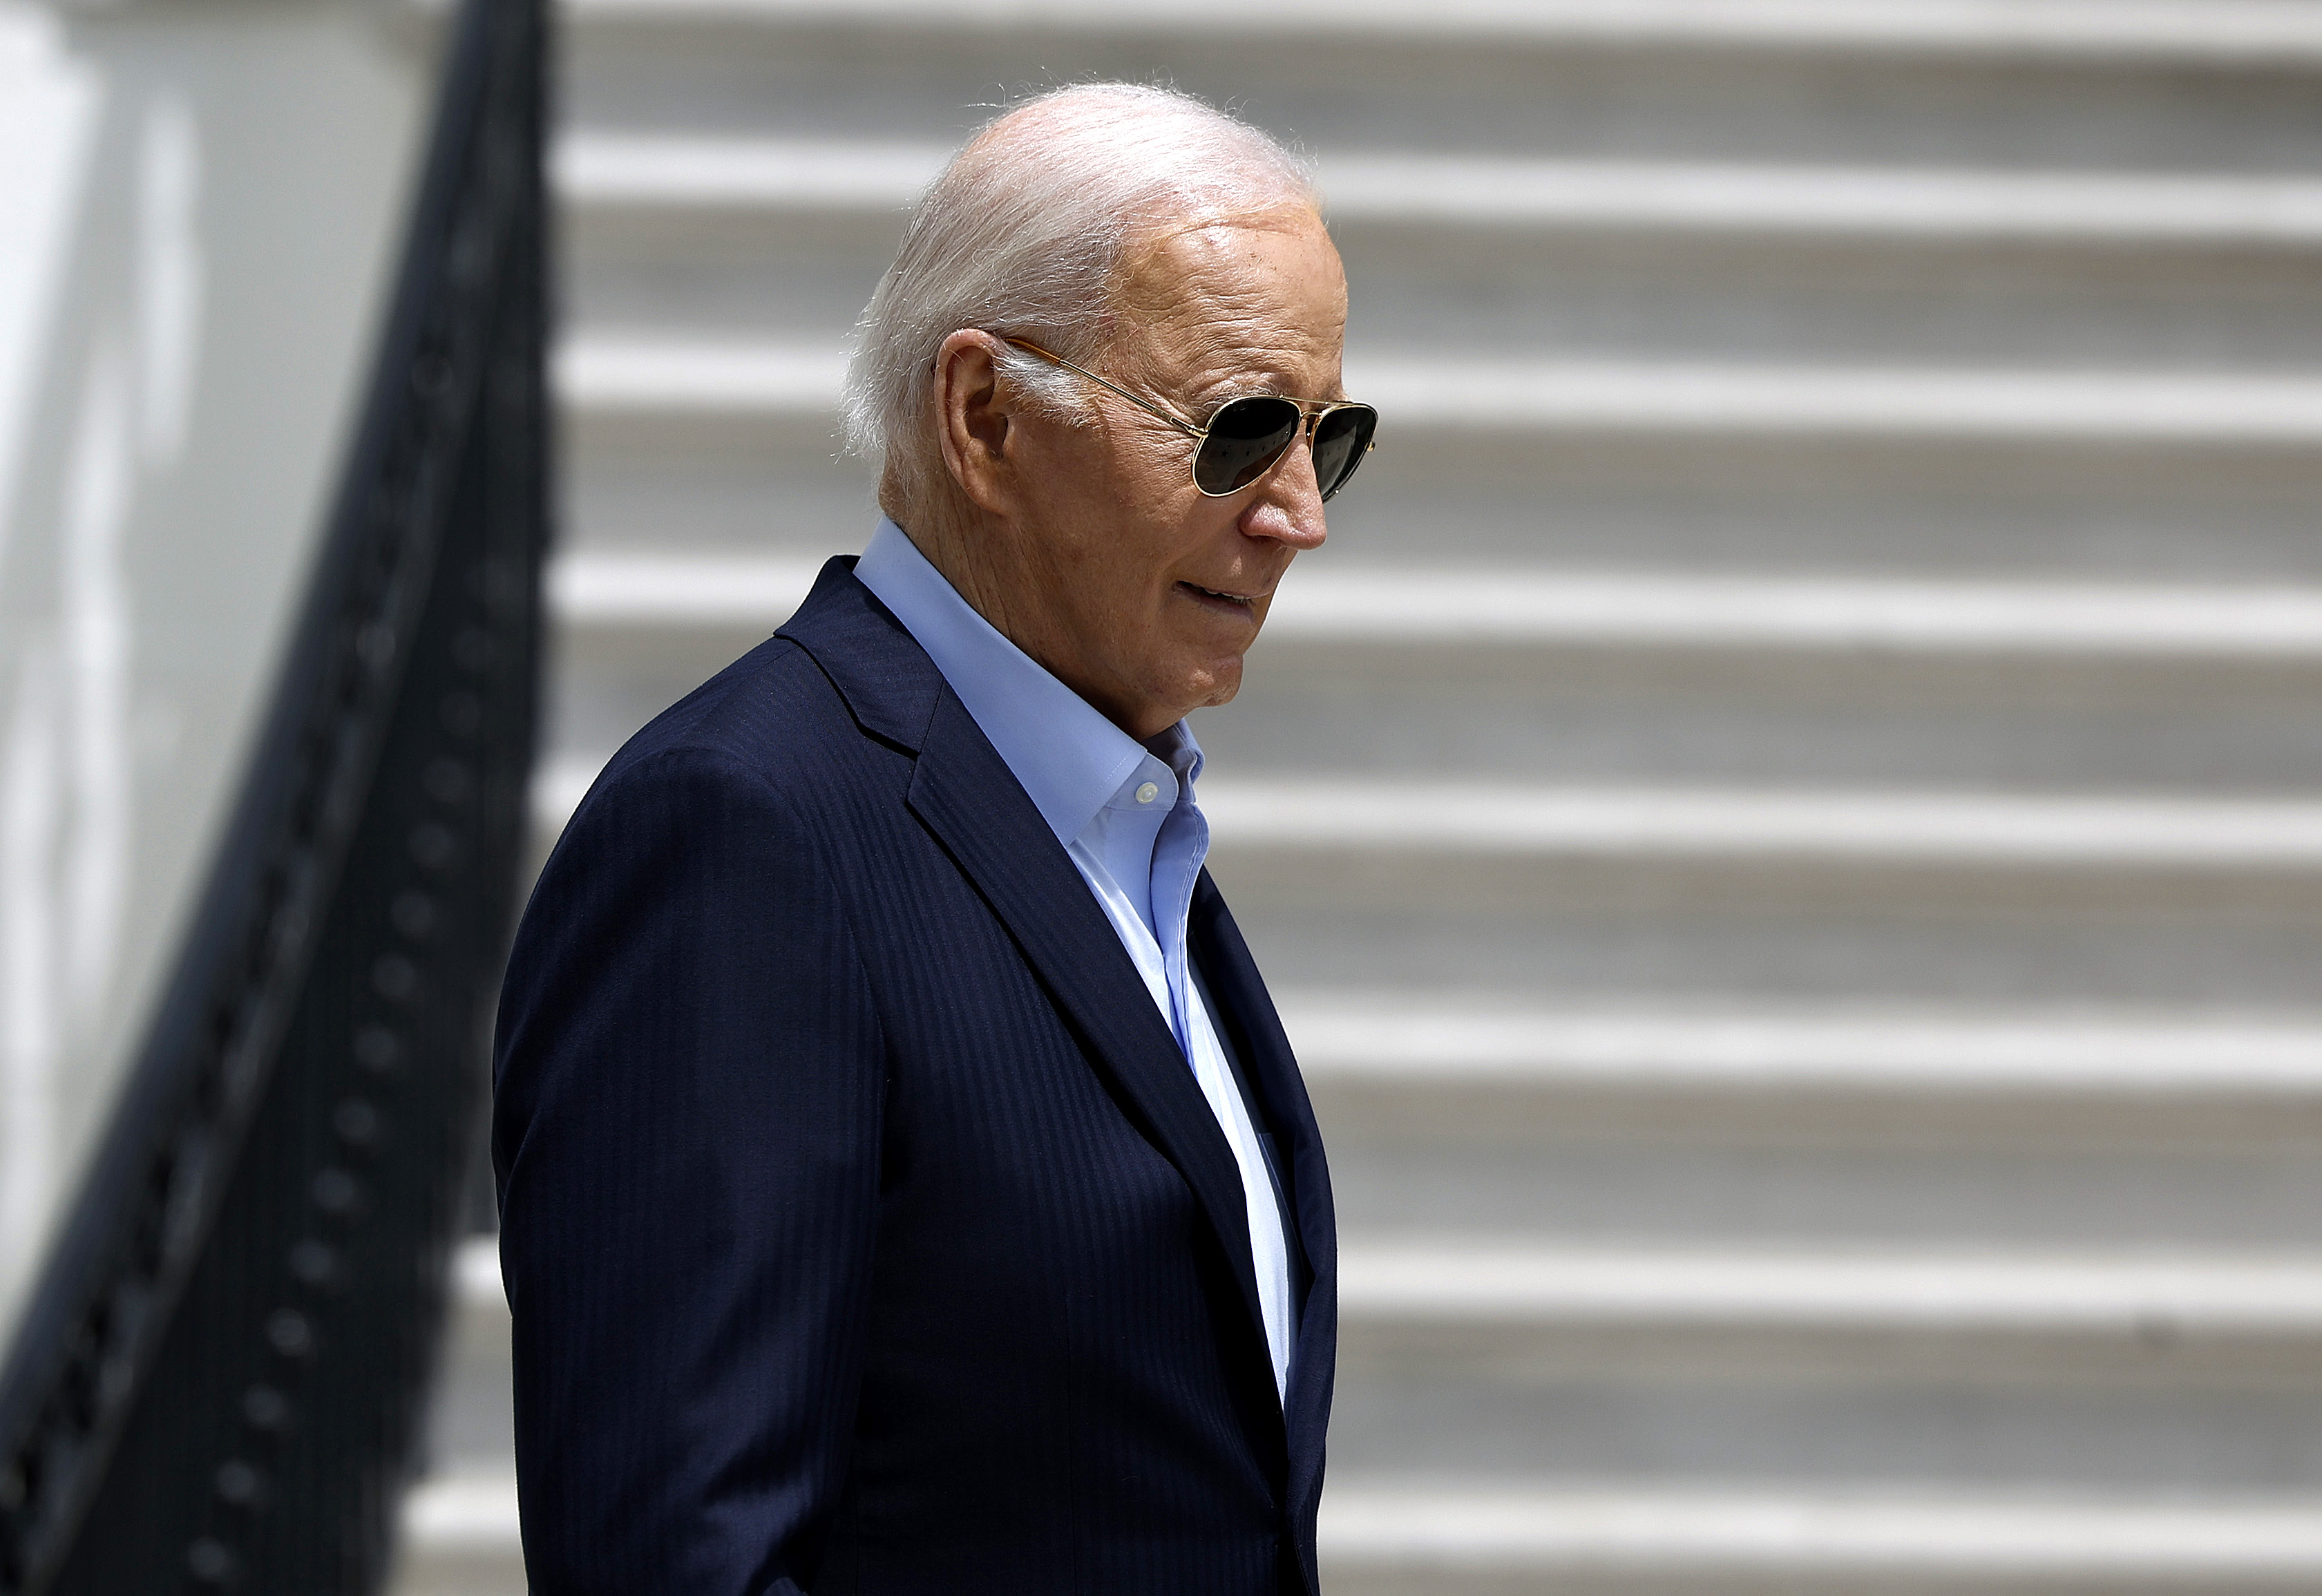 Joe Biden issues decision on sending National Guard to campus protests